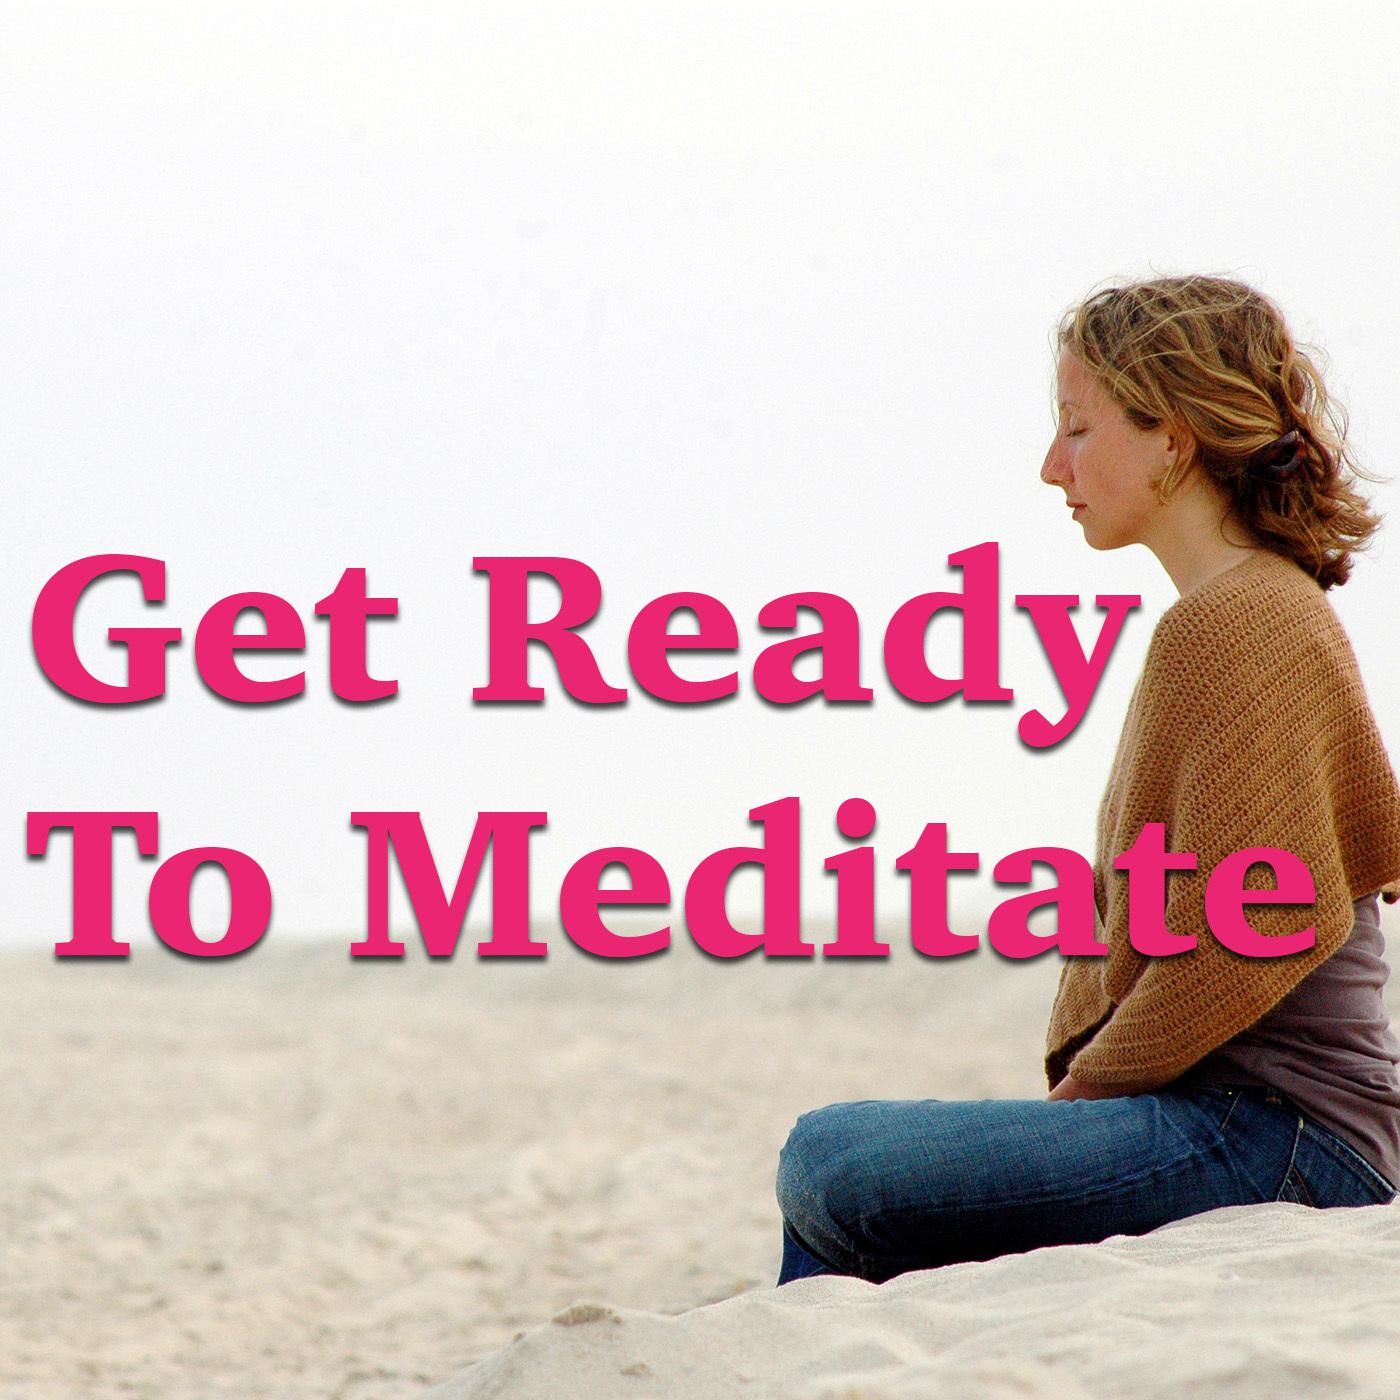 Get Ready To Meditate